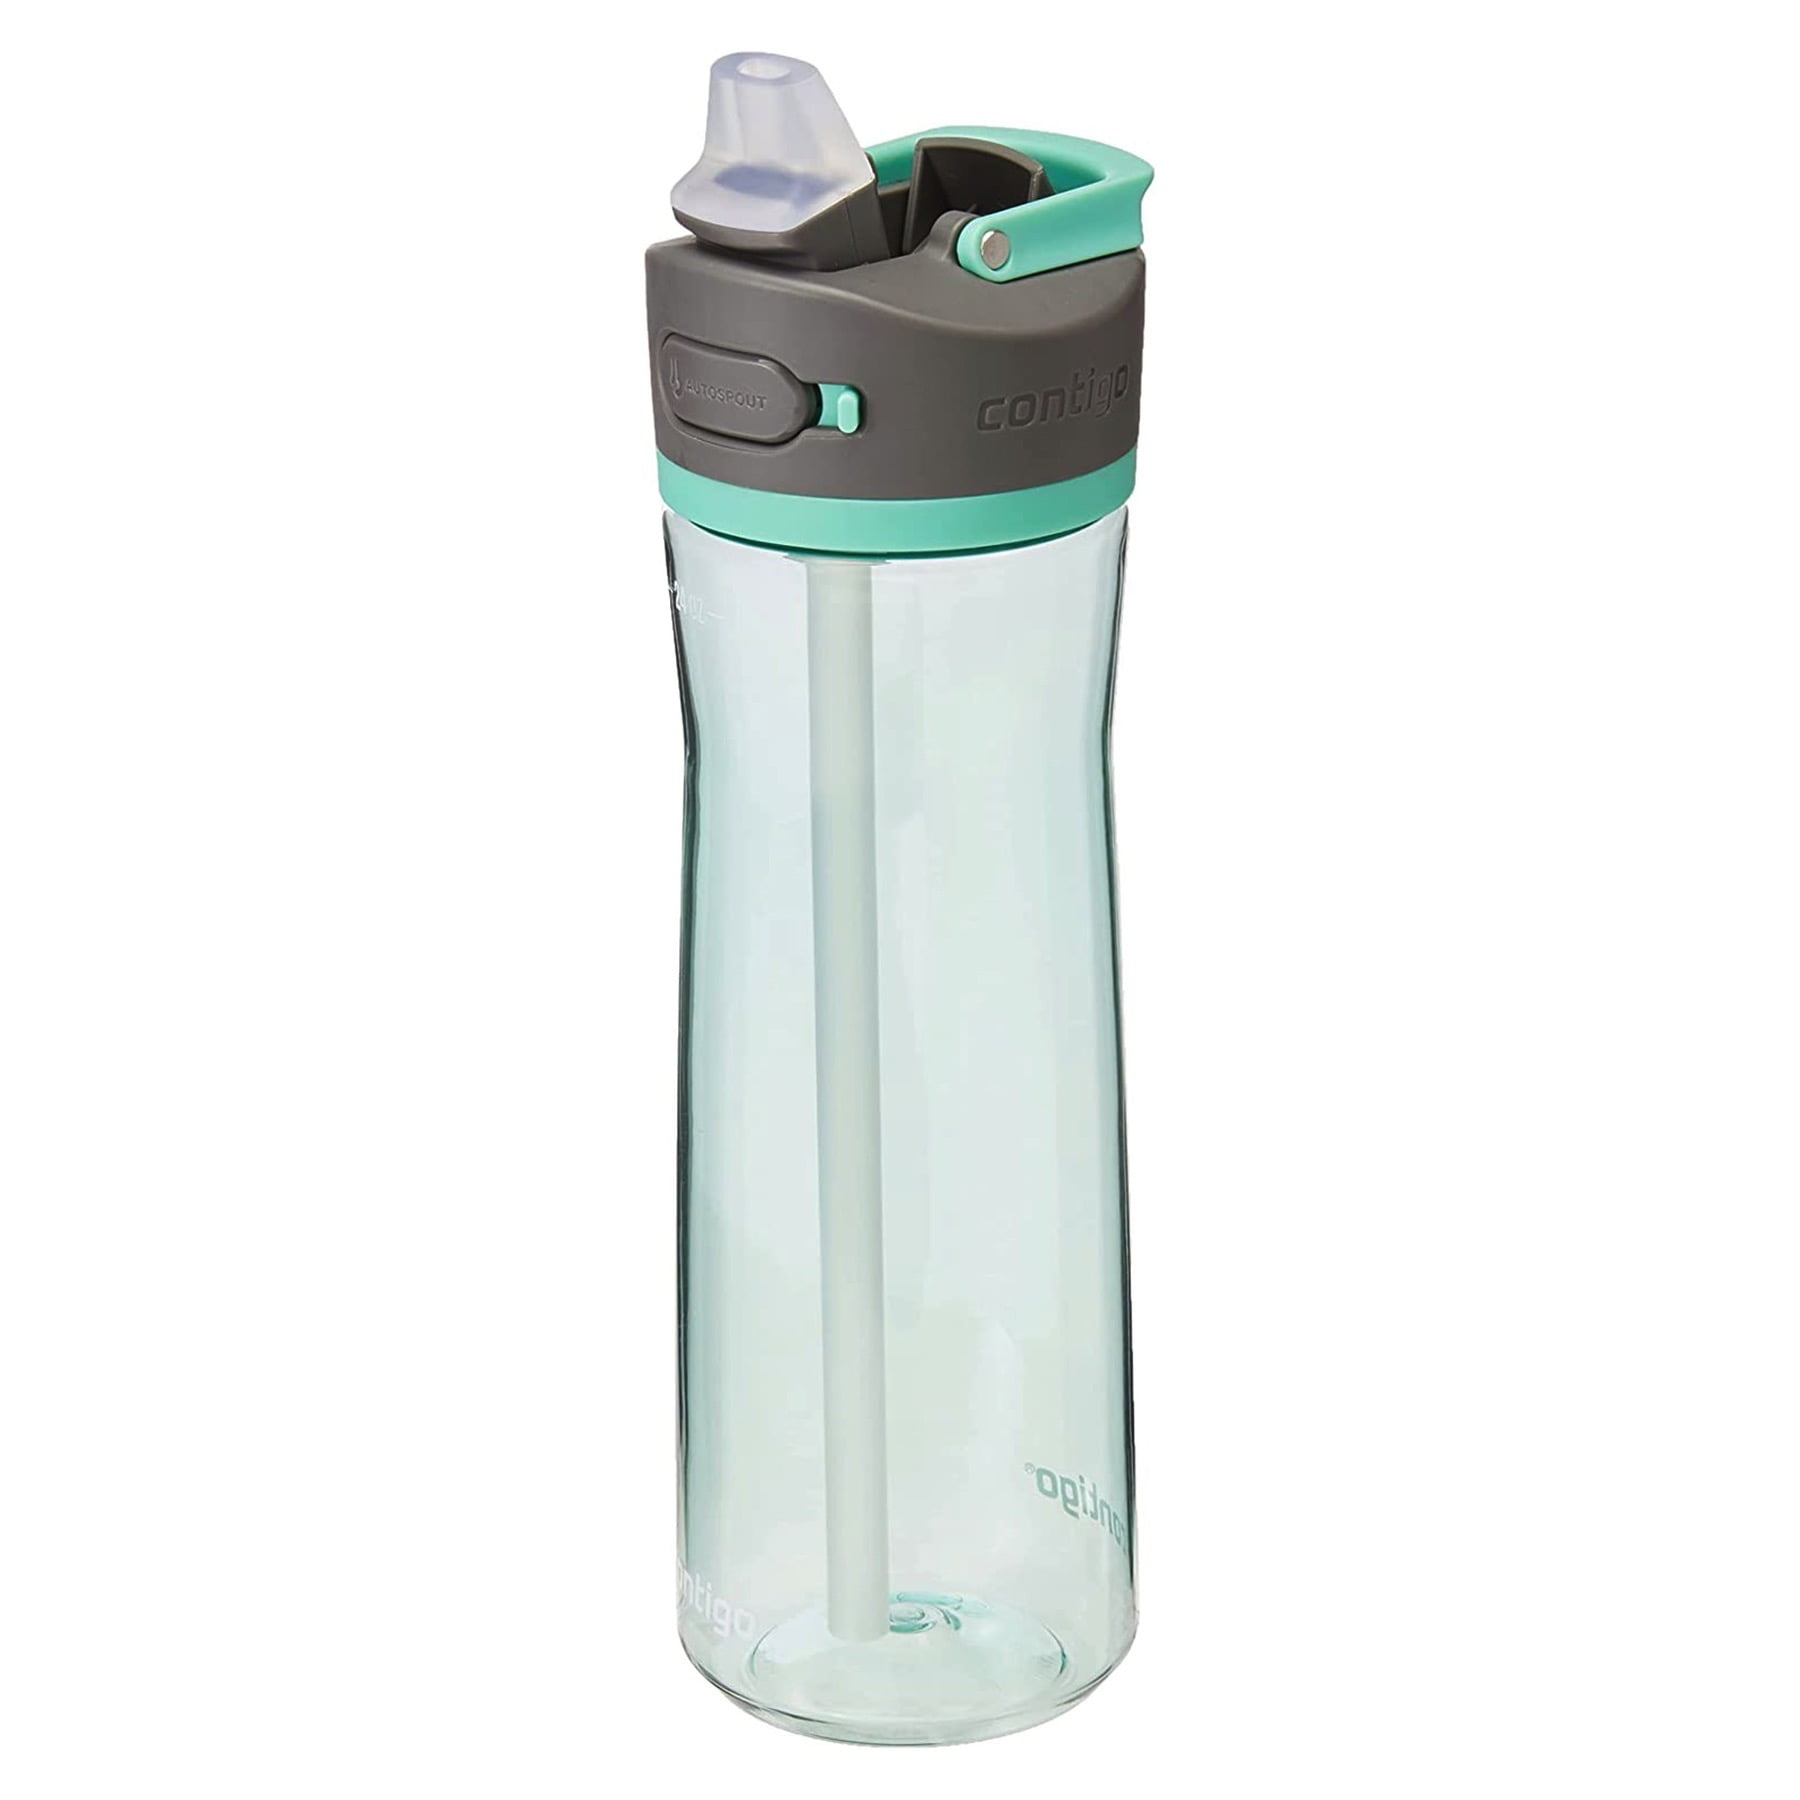 18 oz Coral Water Bottle – Store – Coyote Coffee Cafe